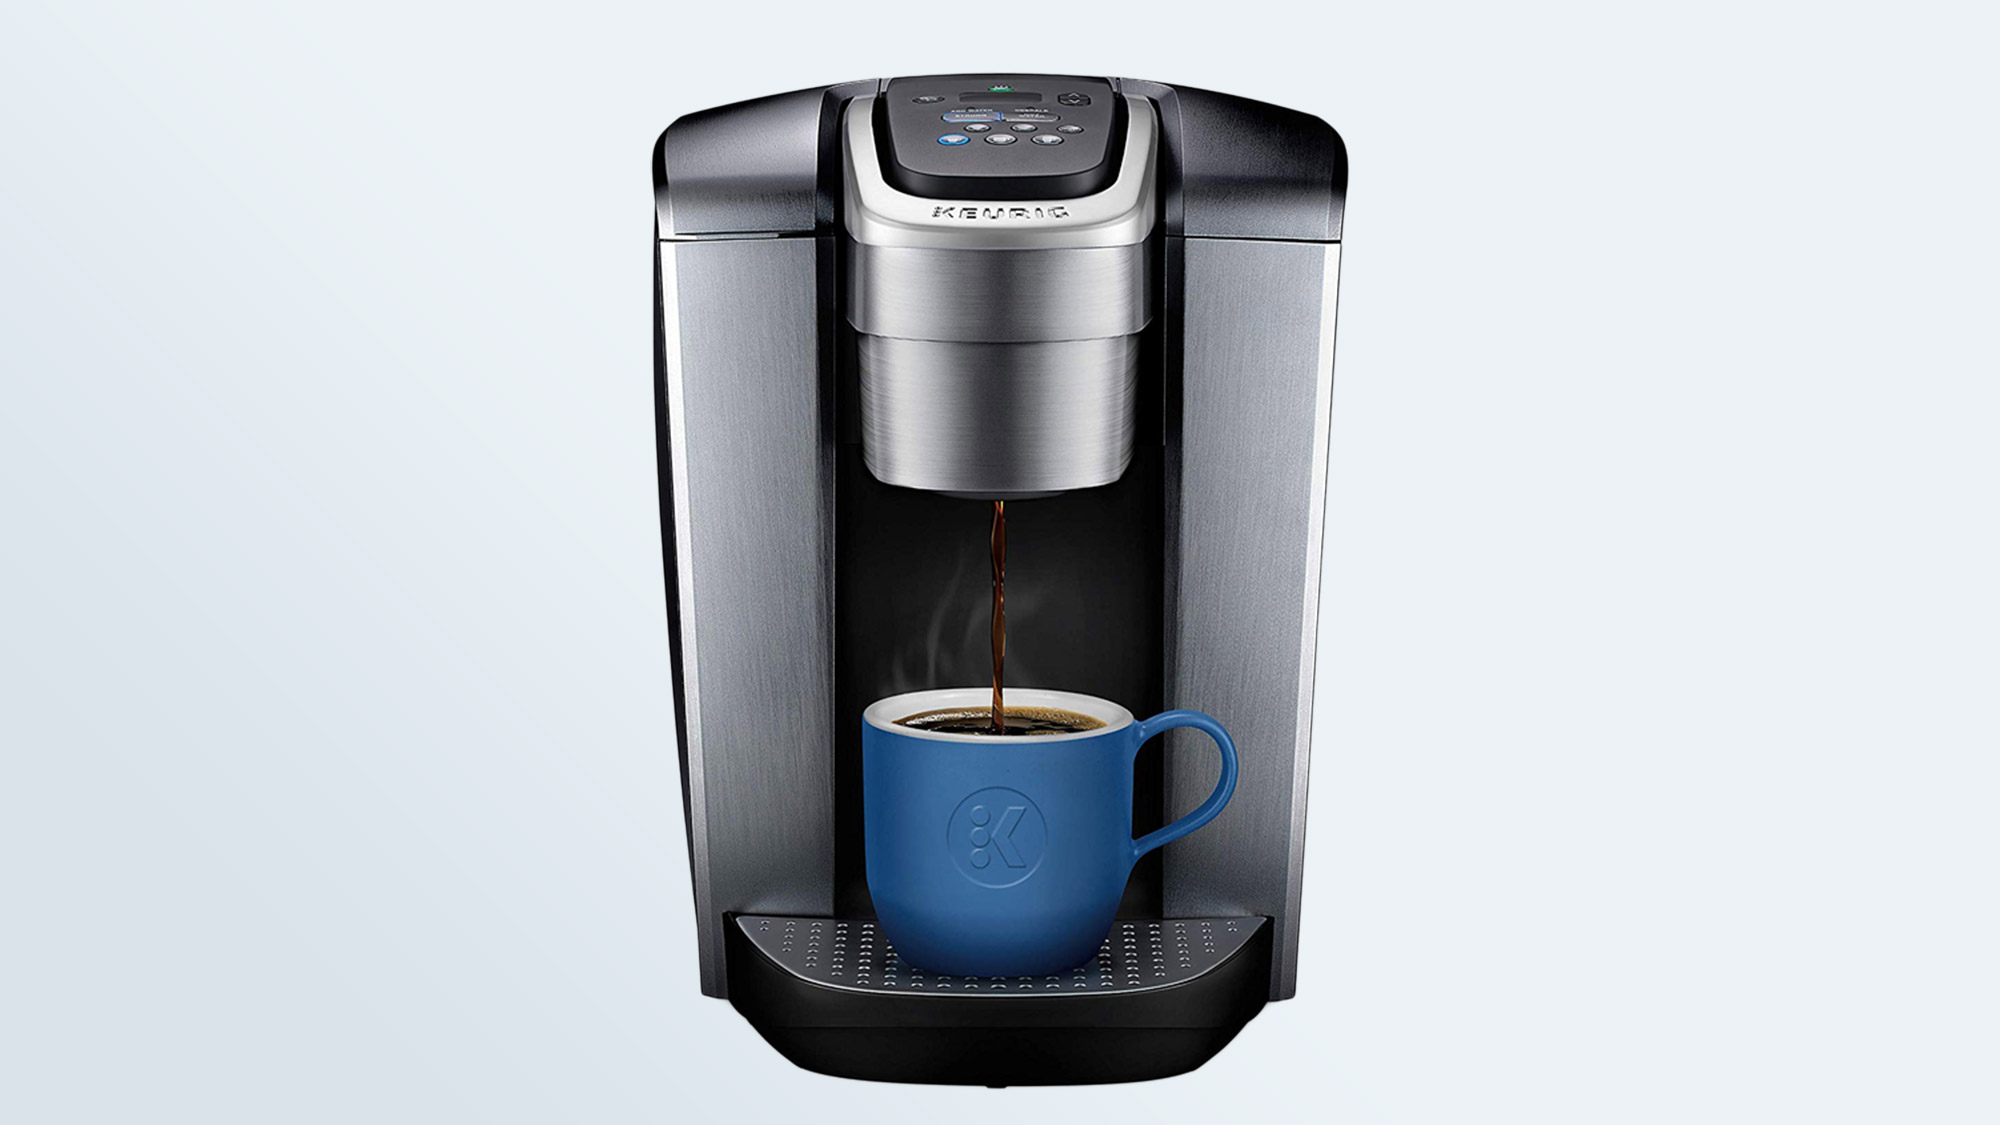 Keurig Coffee Maker Buying Guide Affordable to Deluxe Models Tom's Guide